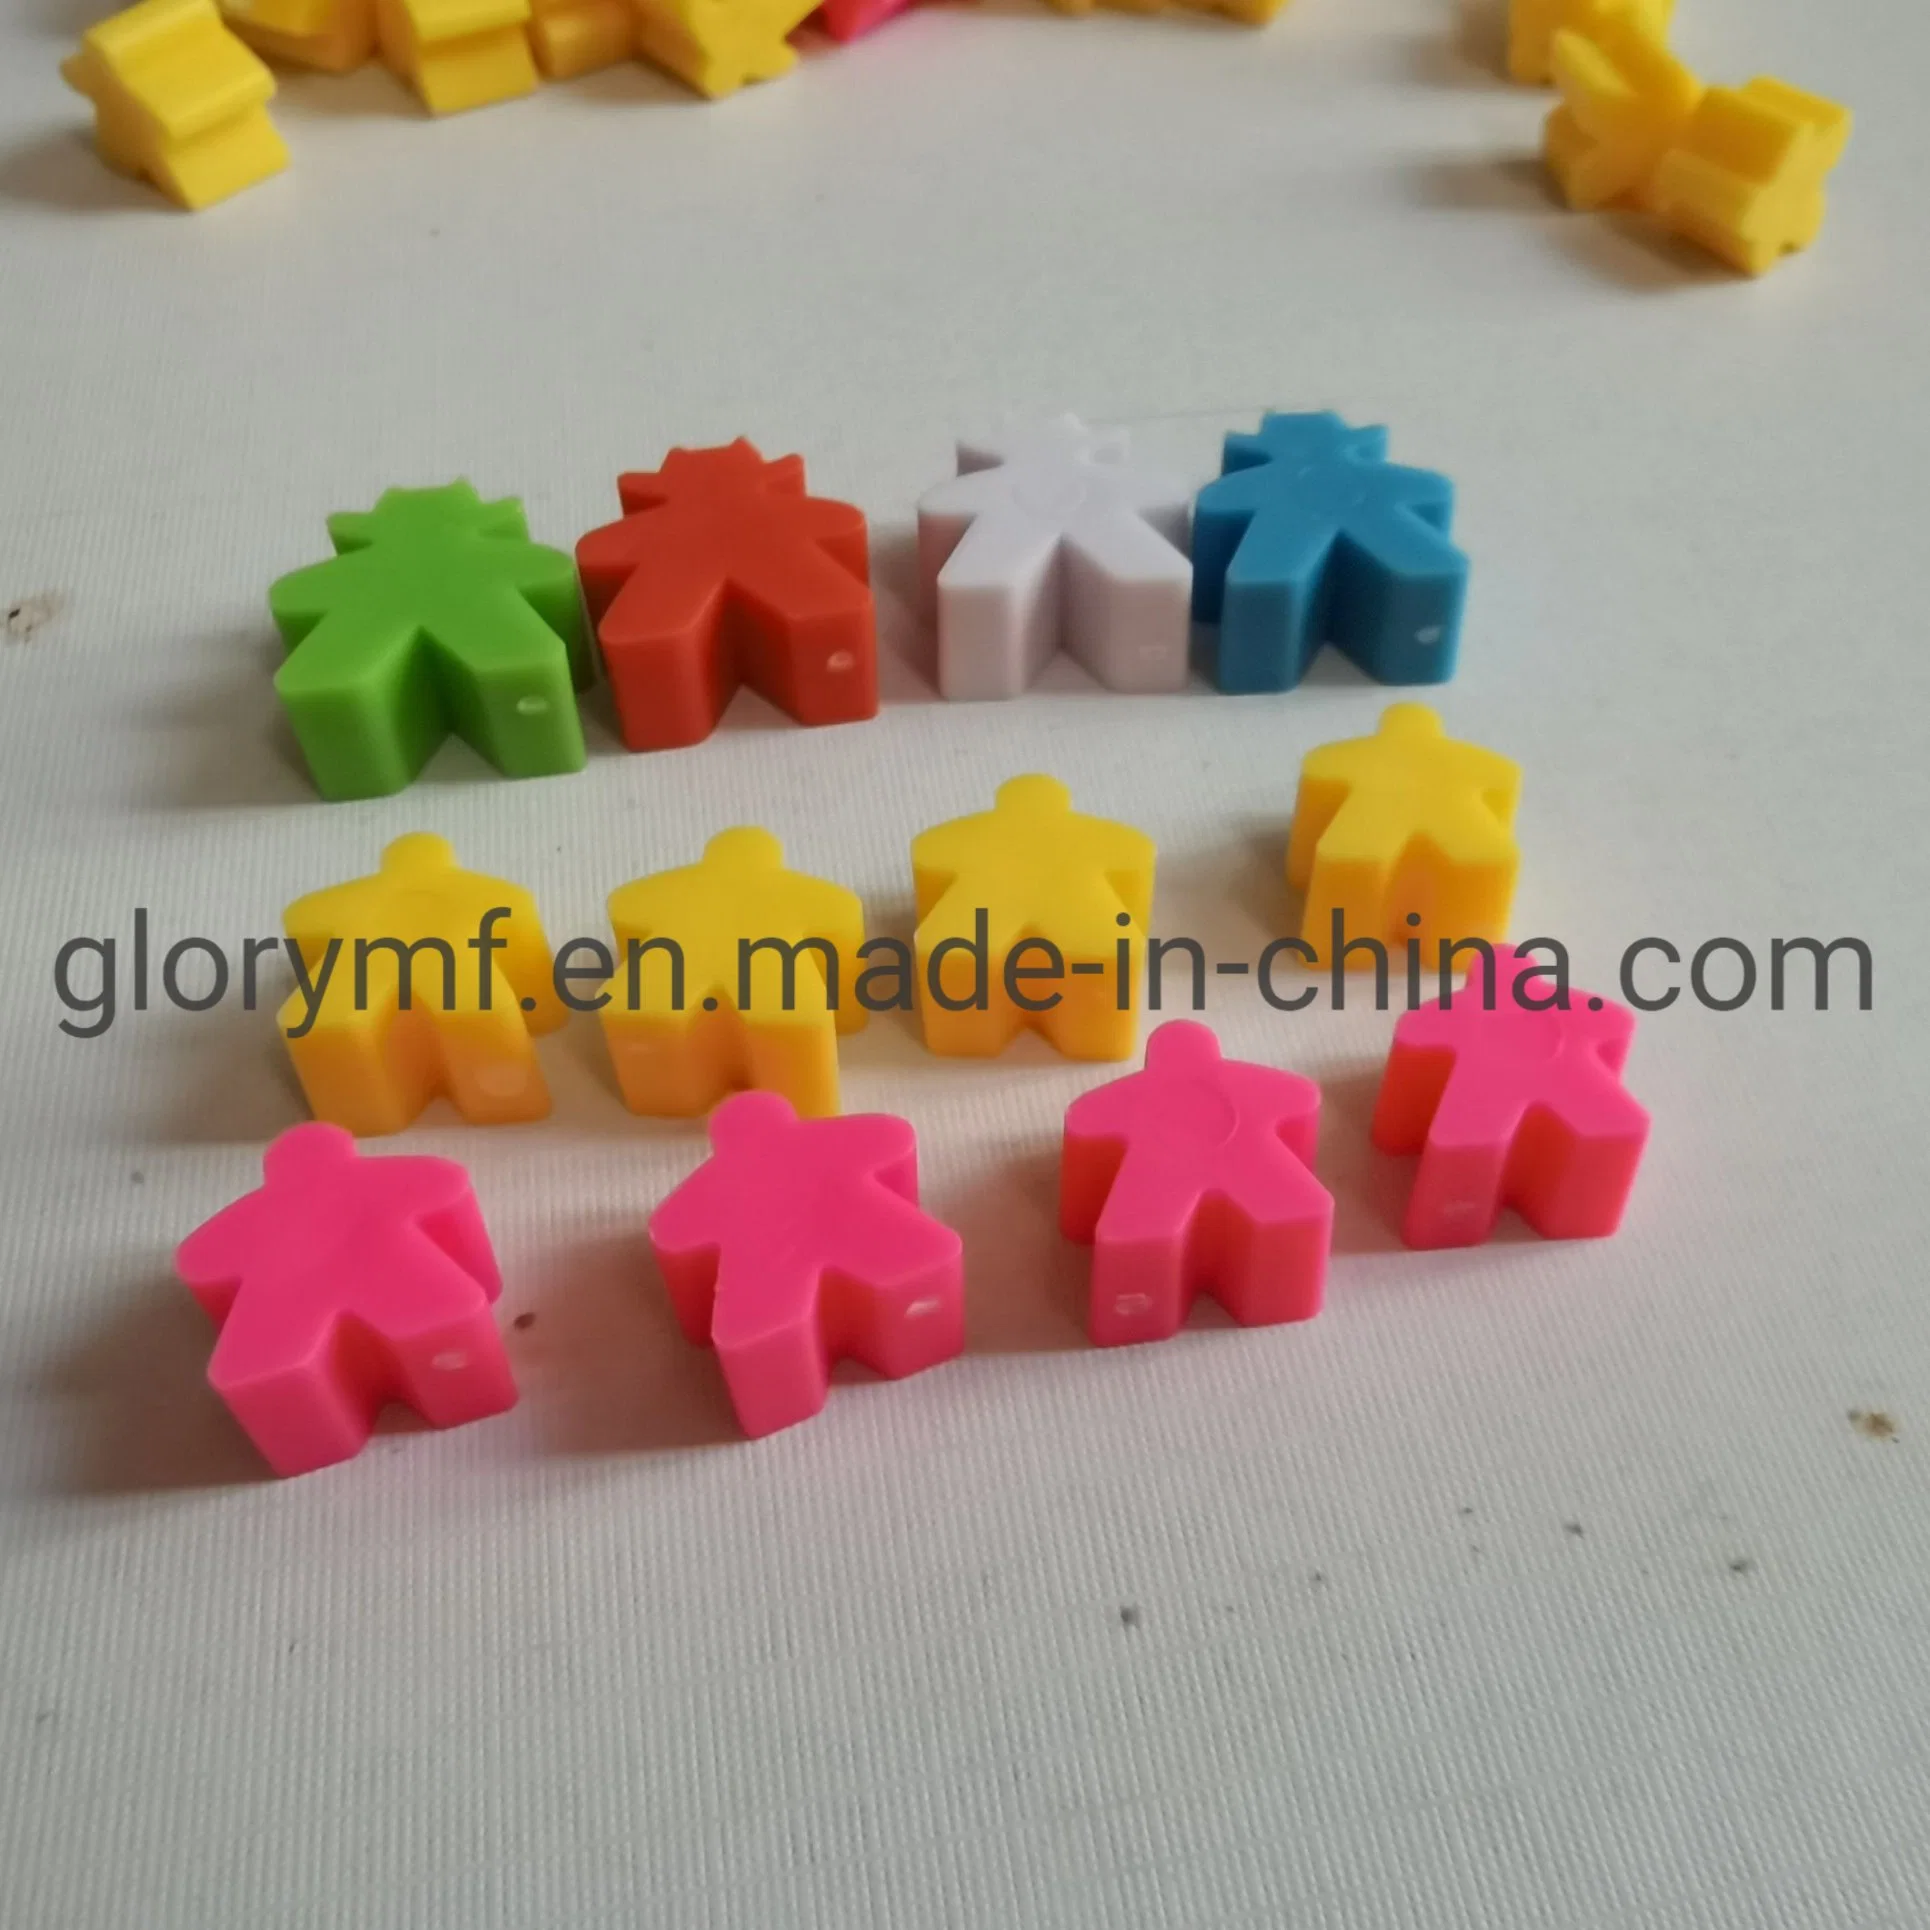 China Suppliers Colorful Plastic Meeples for Board Game Card Game